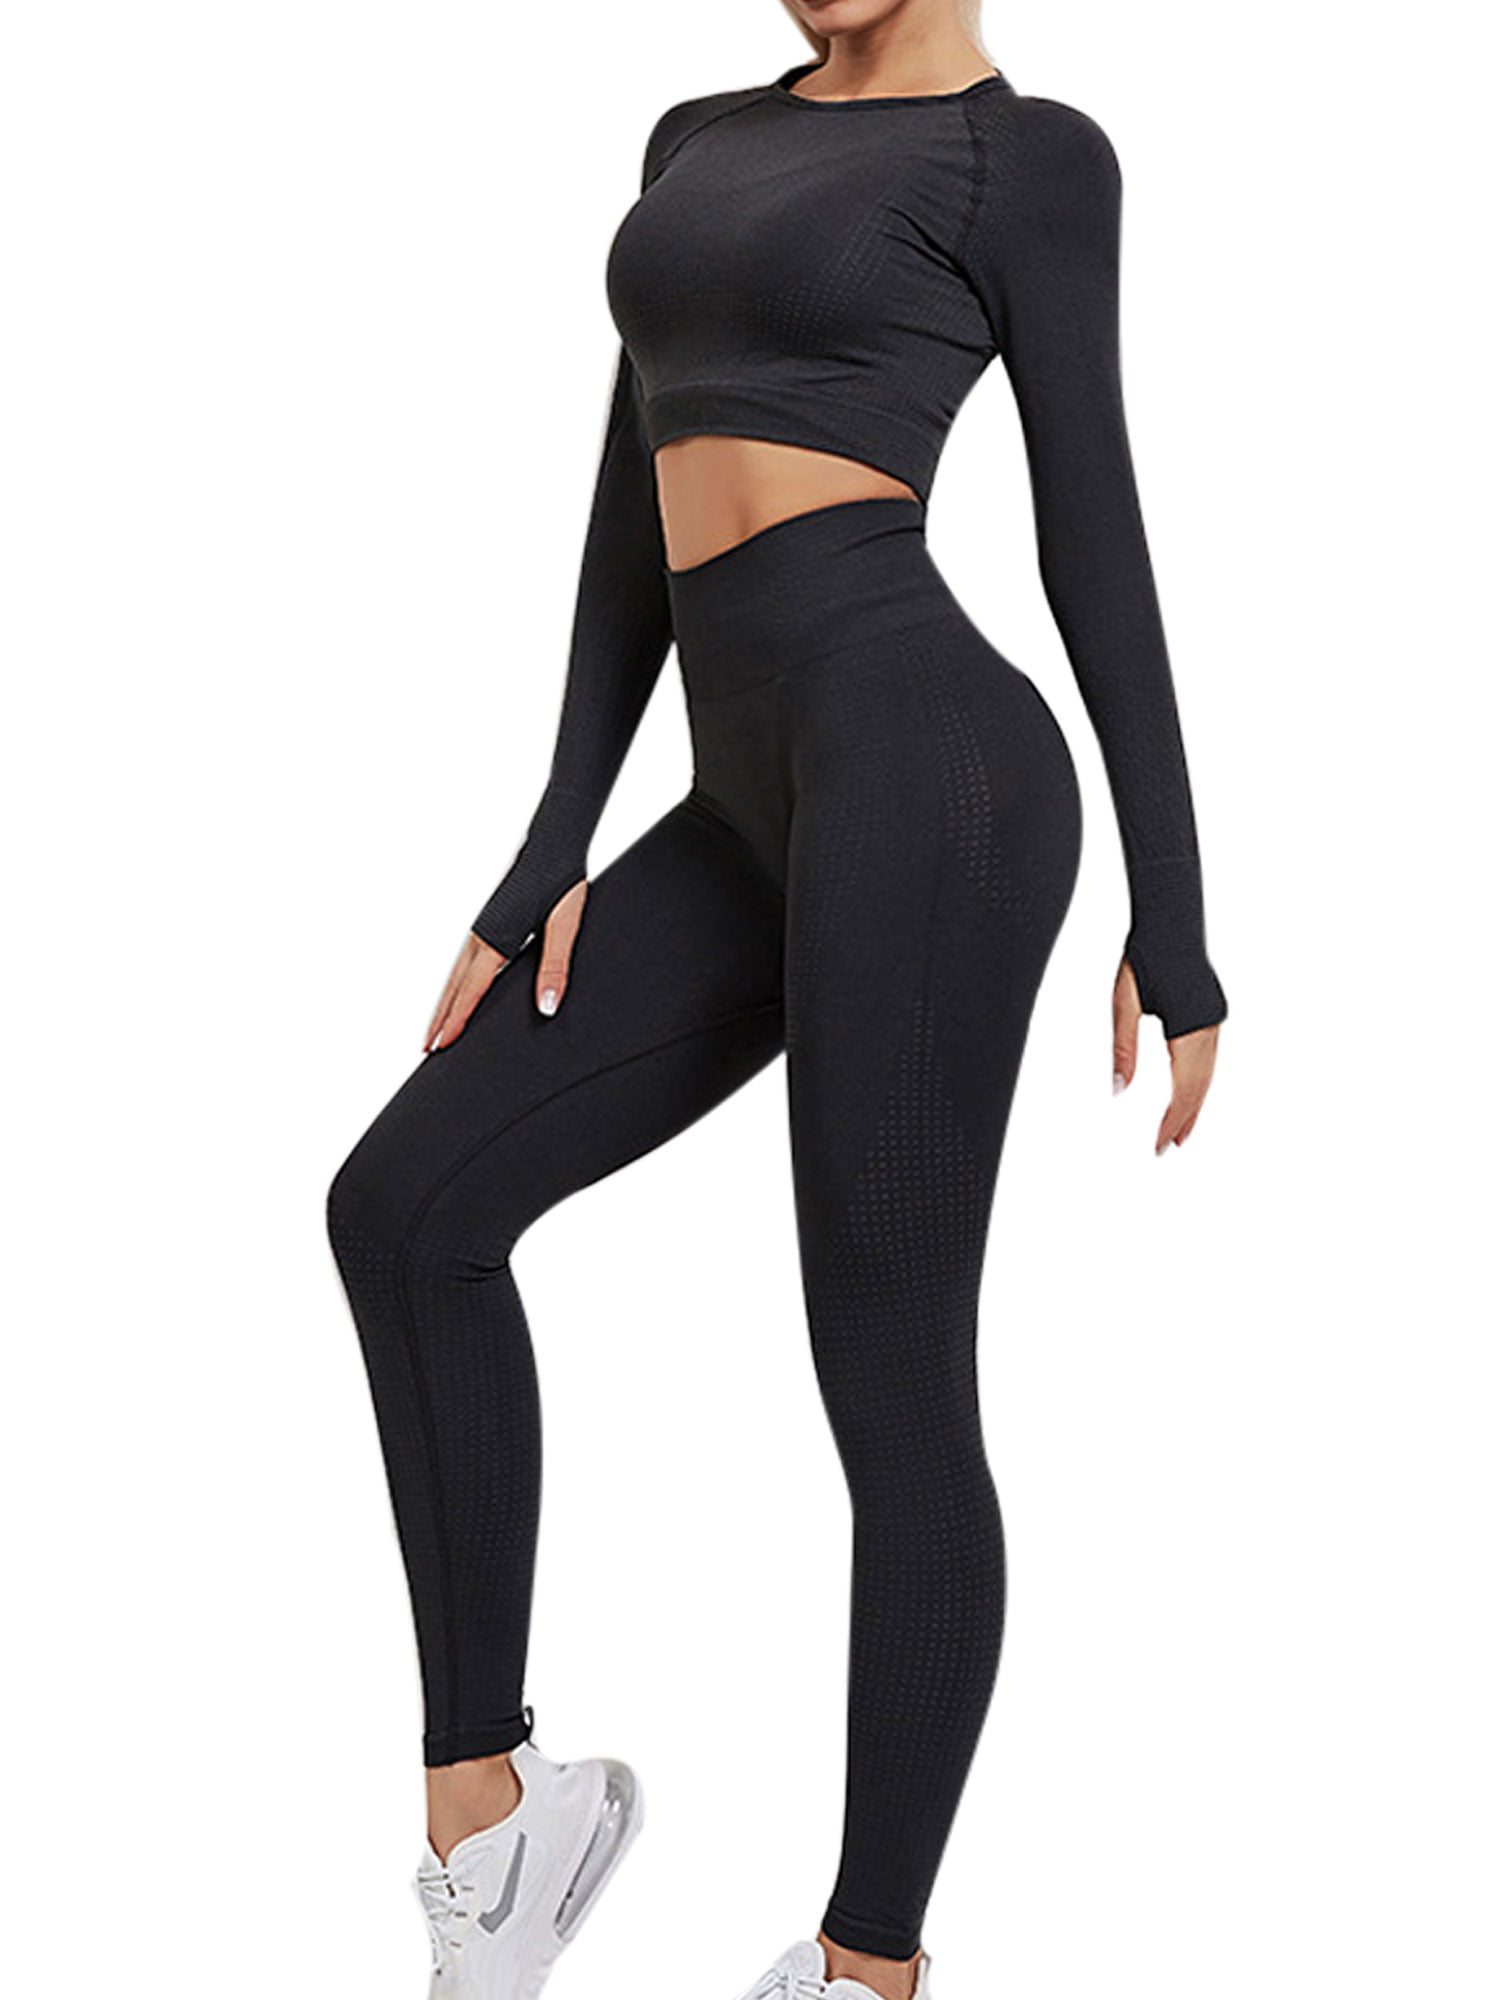 MuCoo Women Seamless 2 Piece Yoga Gym Workout Outfit Short Sleeve Crop Top and Legging Tracksuit Sportswear 